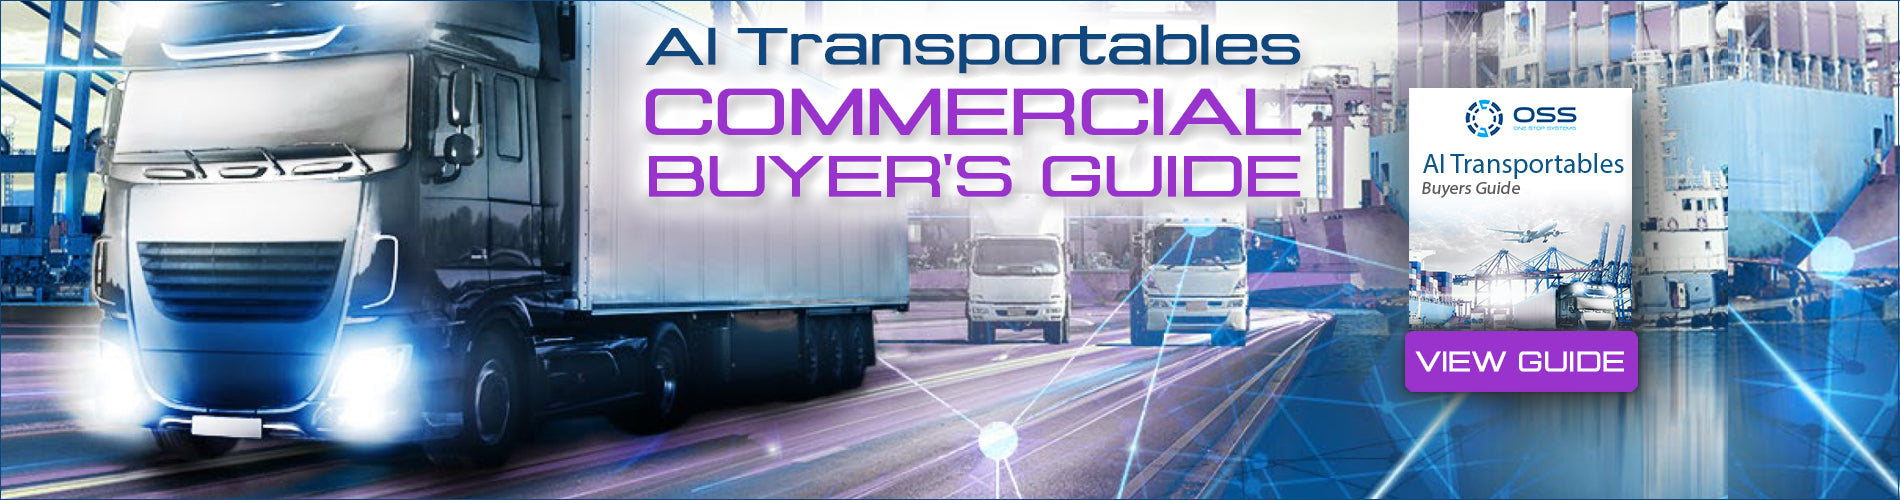 AI Transportables Commercial Buyers Guide